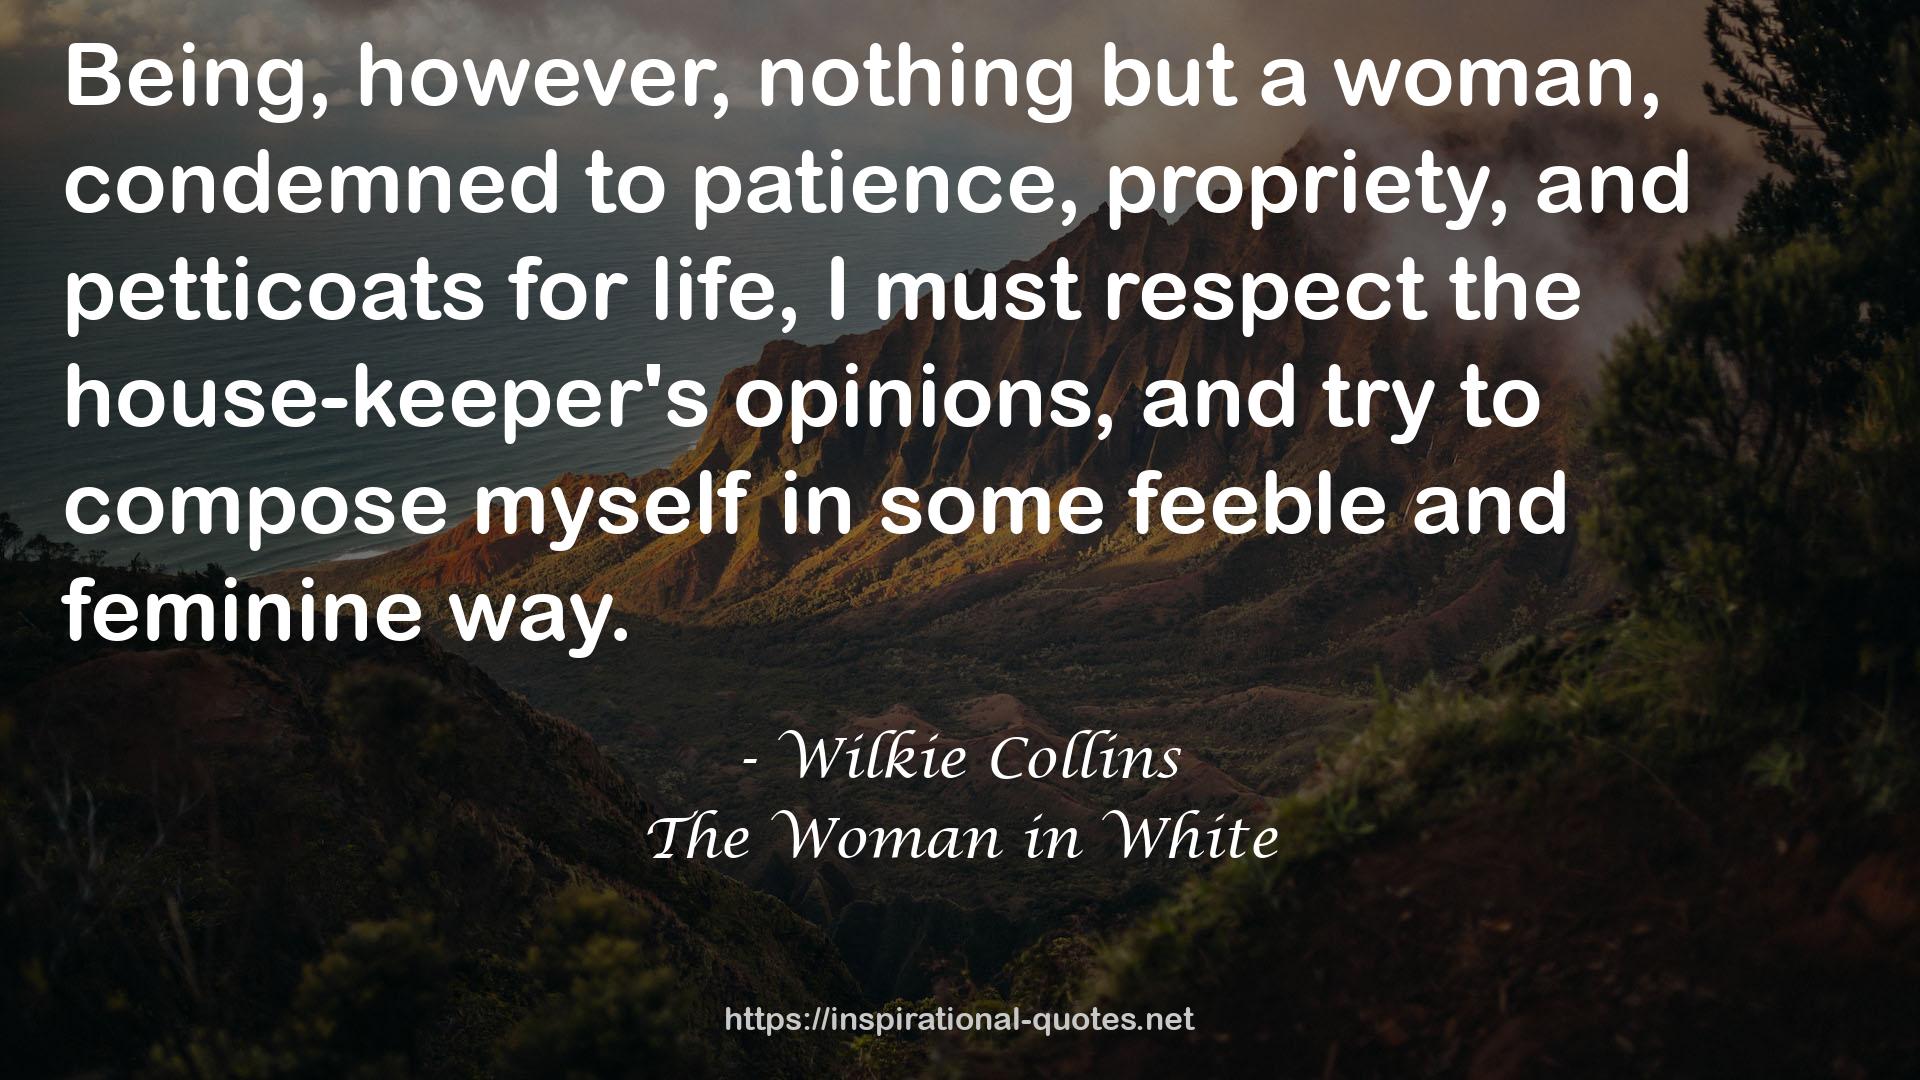 Wilkie Collins QUOTES